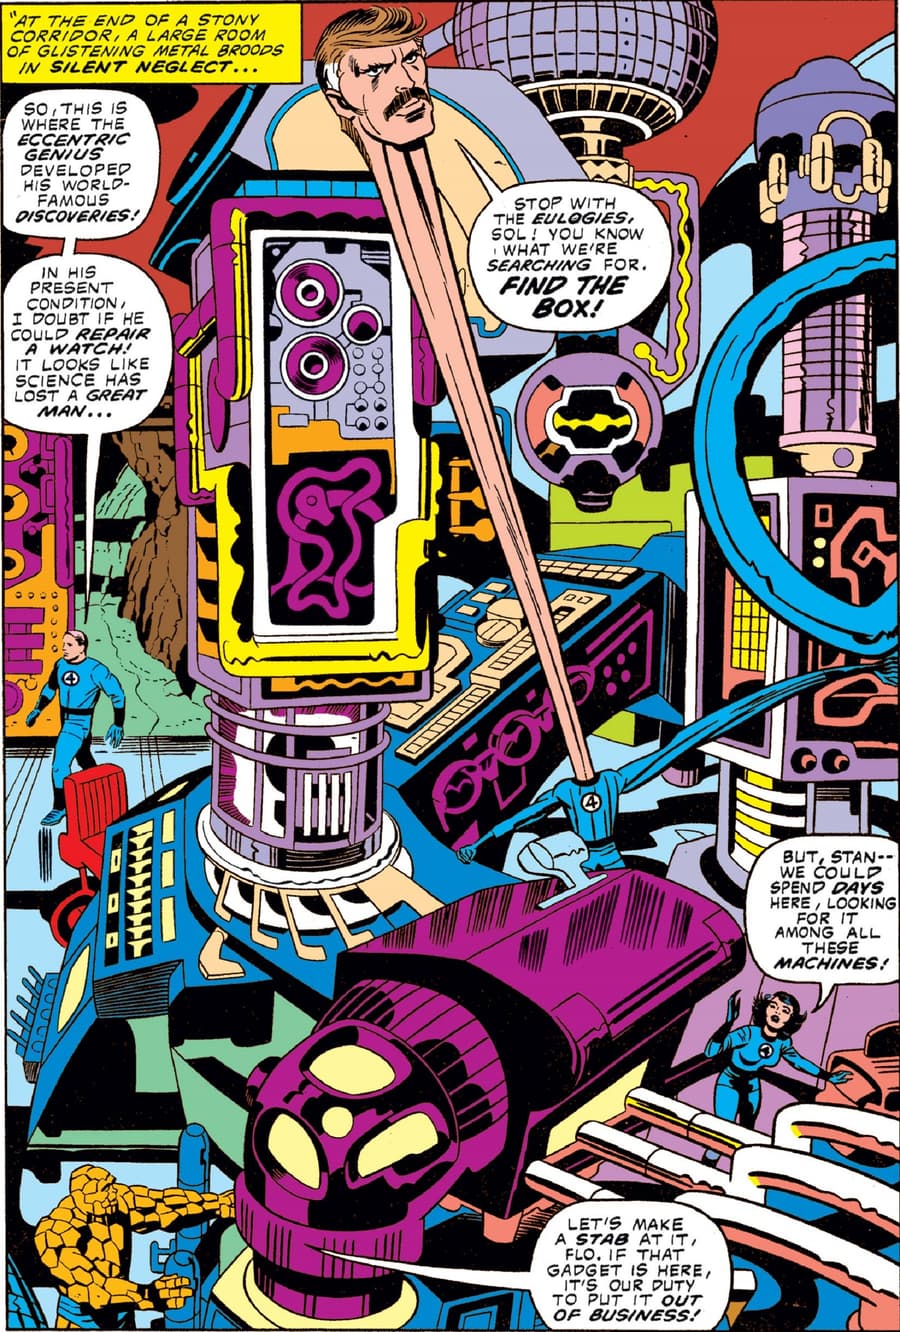 WHAT IF? (1977) #11